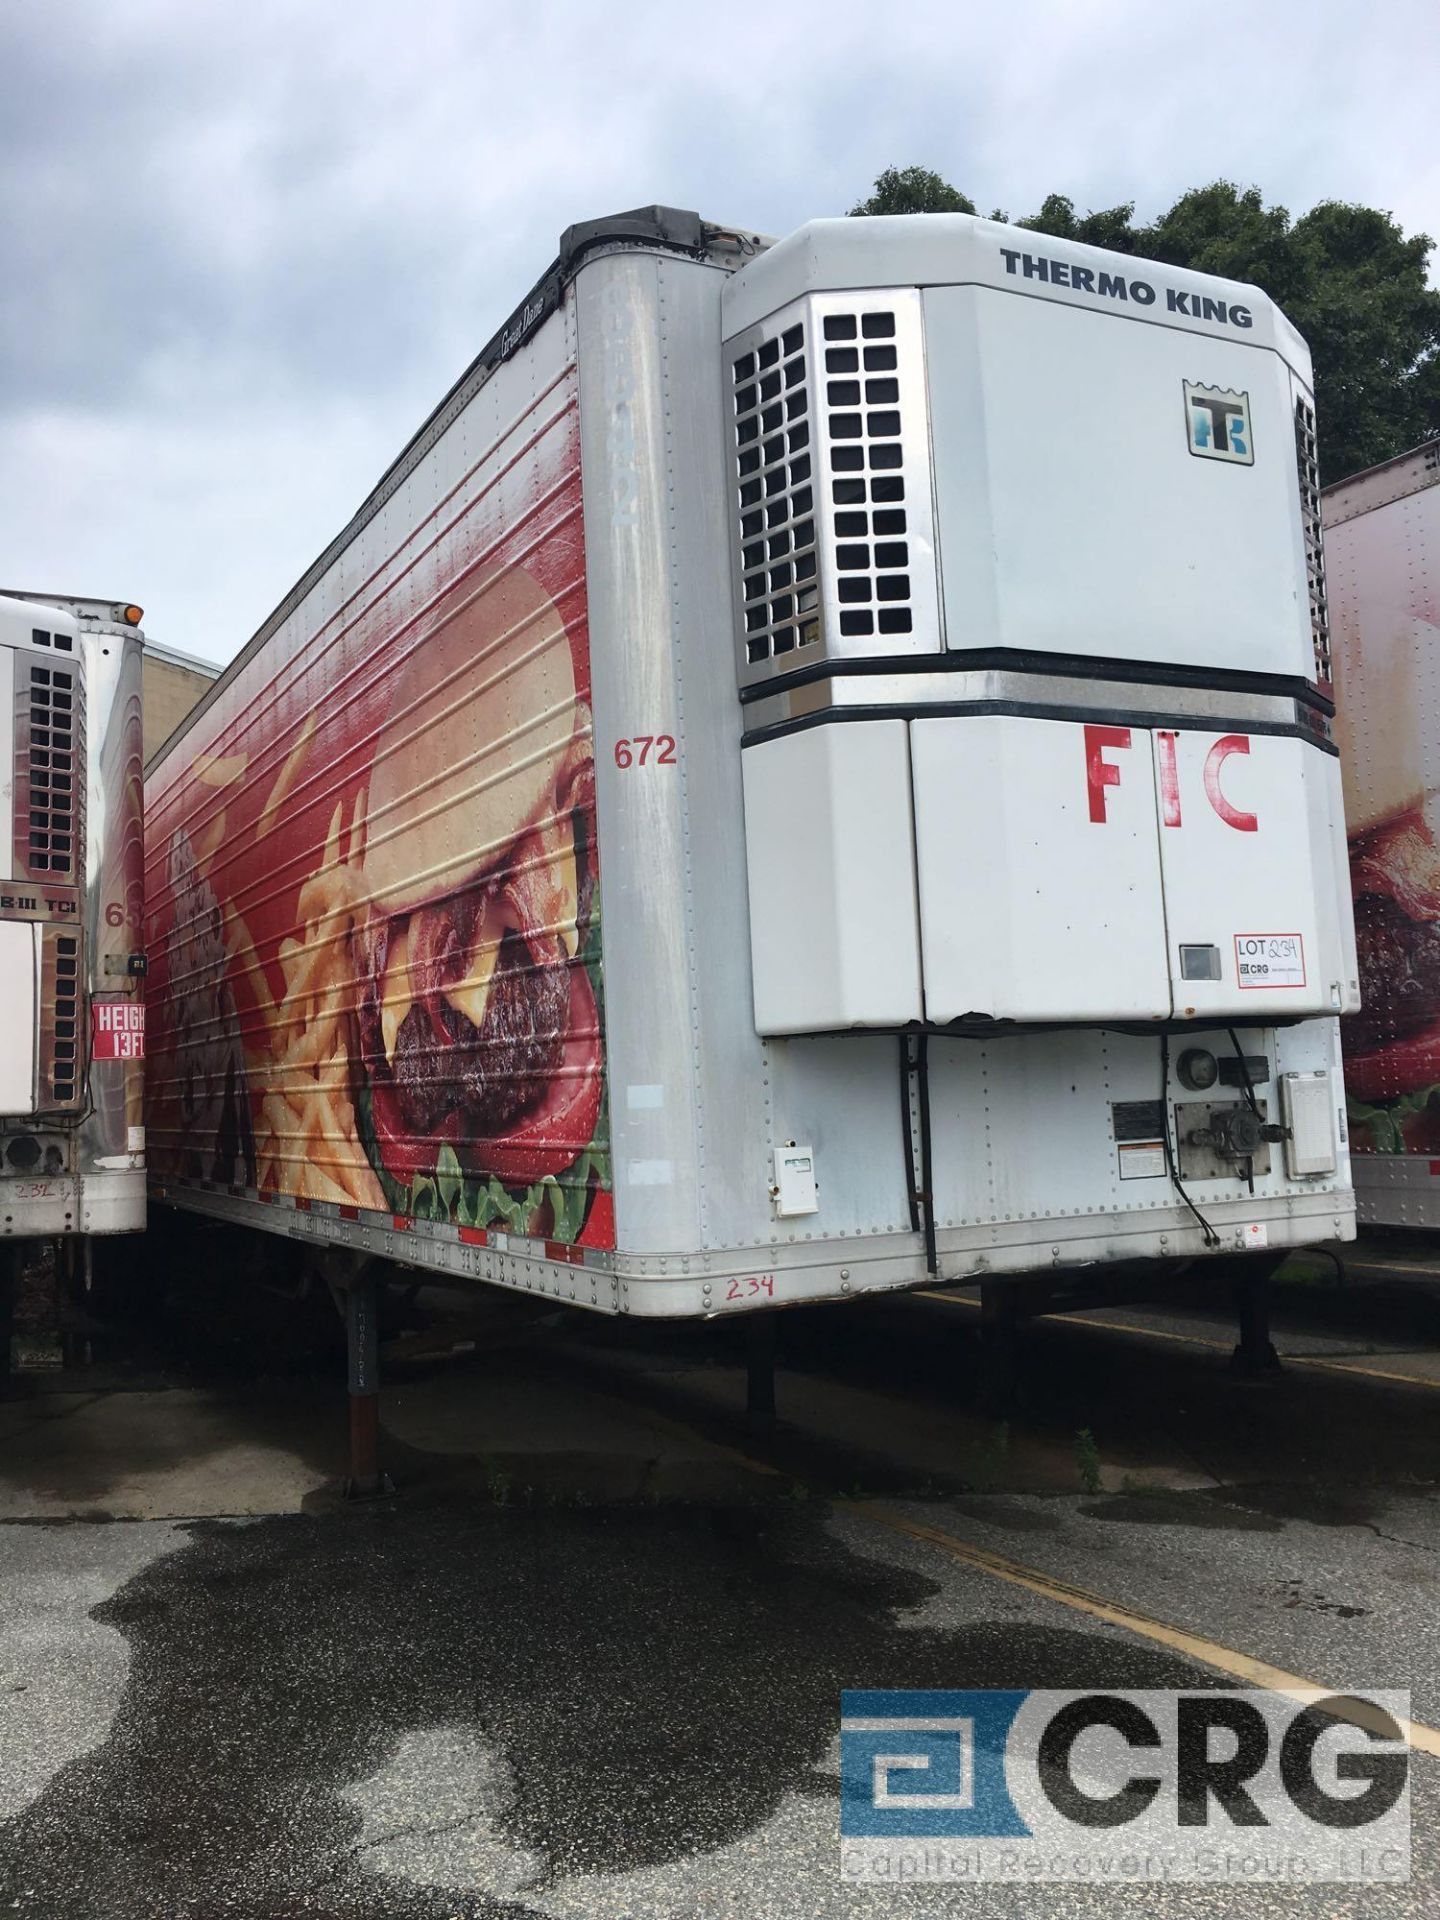 Multi Temp Refrigerated Semi Trailer - 48 Lomg, 96" wide, Thermo King SBIII TCI-SR, n/s hours, 6 - Image 3 of 3